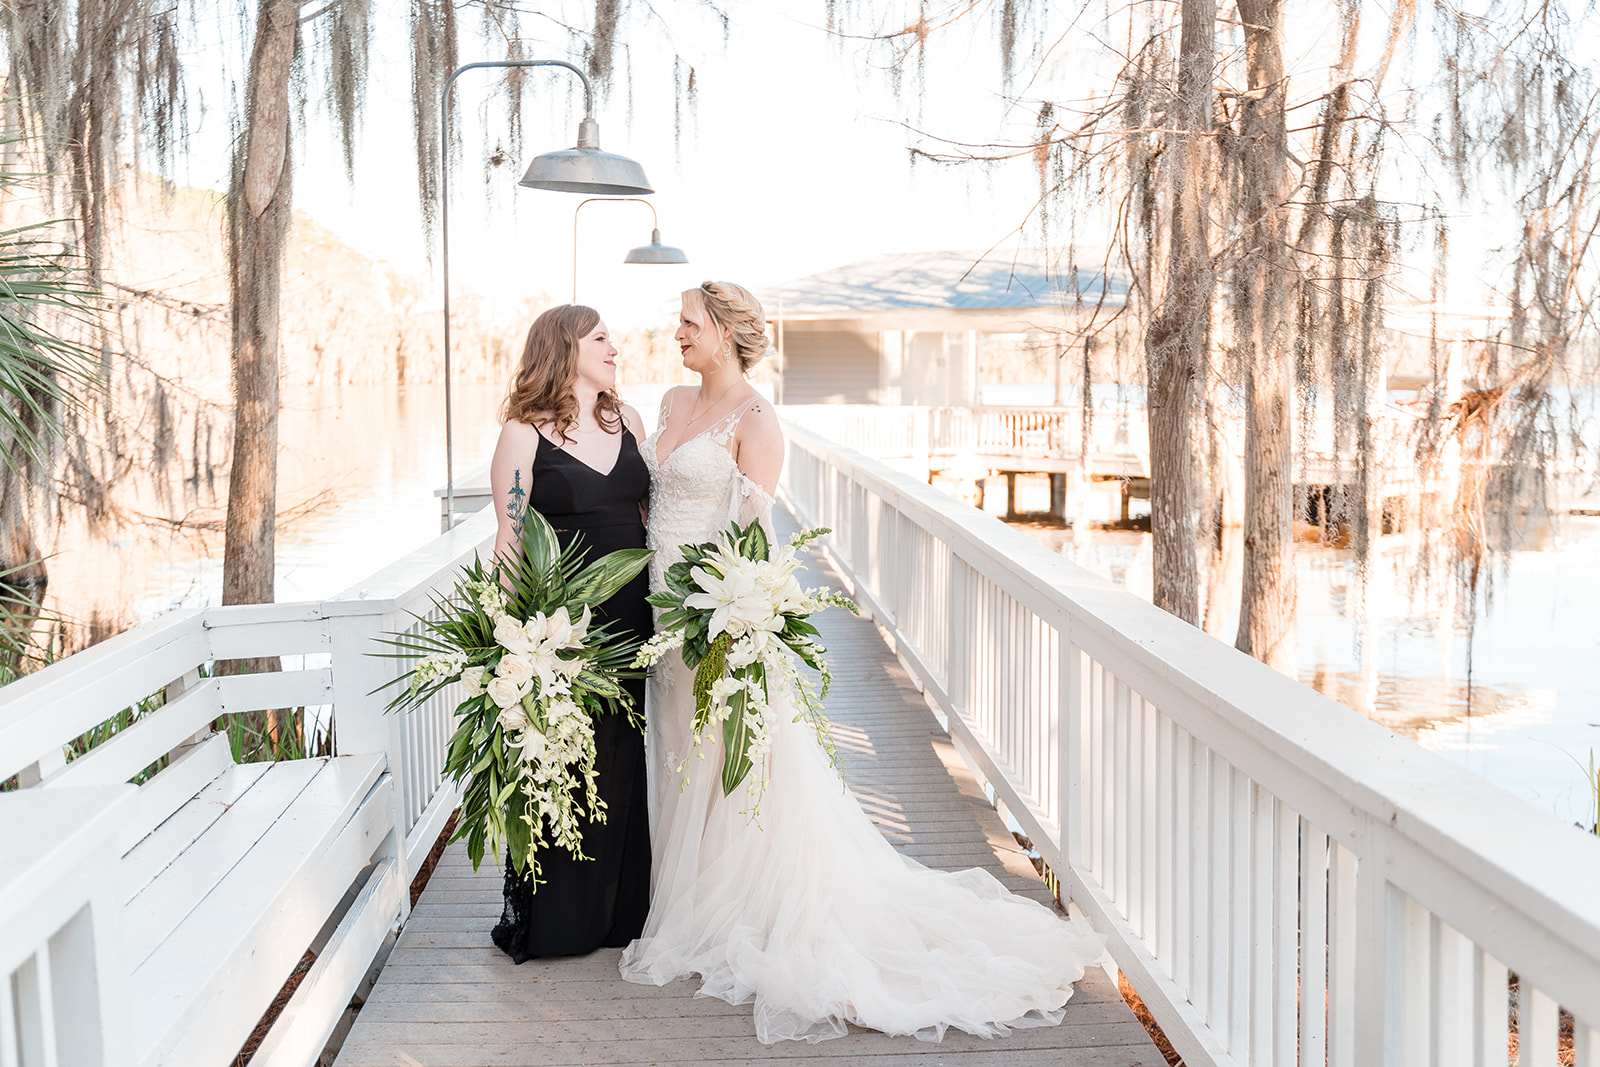 Two brides standing on a bridge, gazing into each other's eyes with love and affection, both holding flower bouquets, one in a black dress and the other in a white dress.